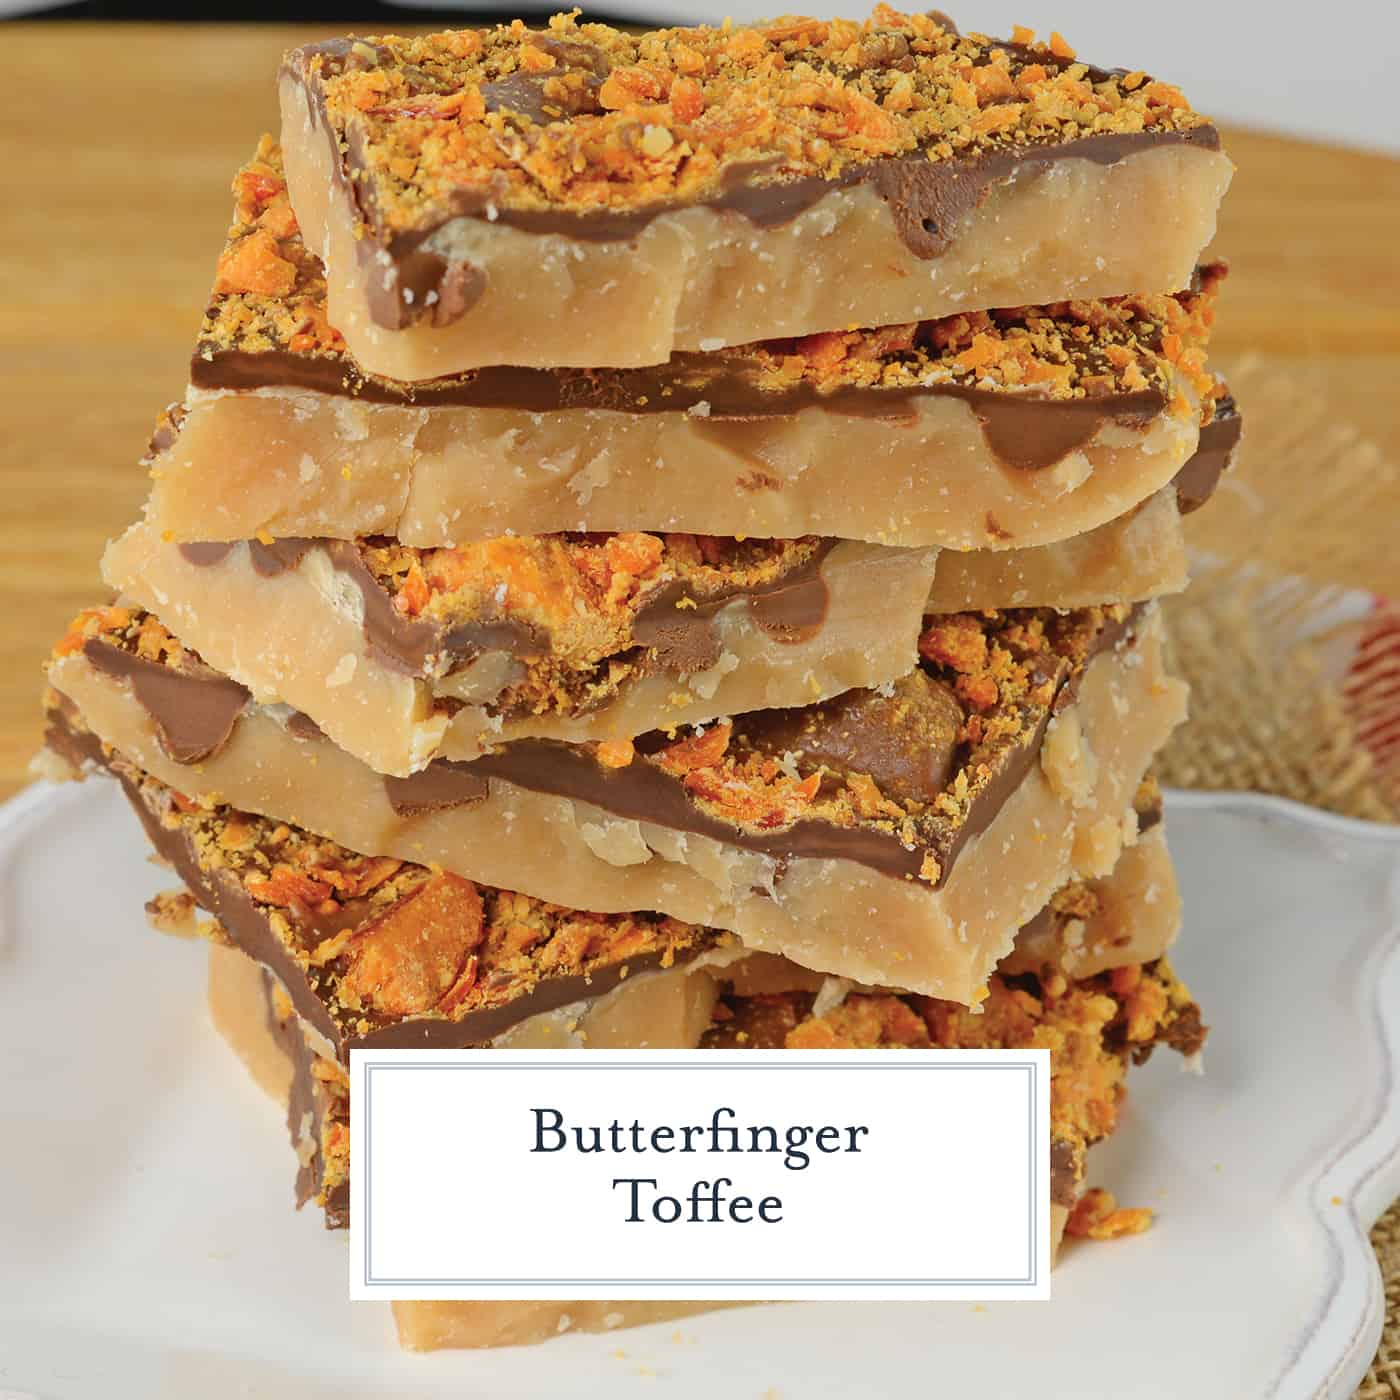 Candy Toffee is an easy holiday treat using only 6 ingredients and taking just 20 minutes! Make this easy toffee recipe for your holiday cookie tray! #buttertoffee #englishtoffee www.savoryexperiments.com